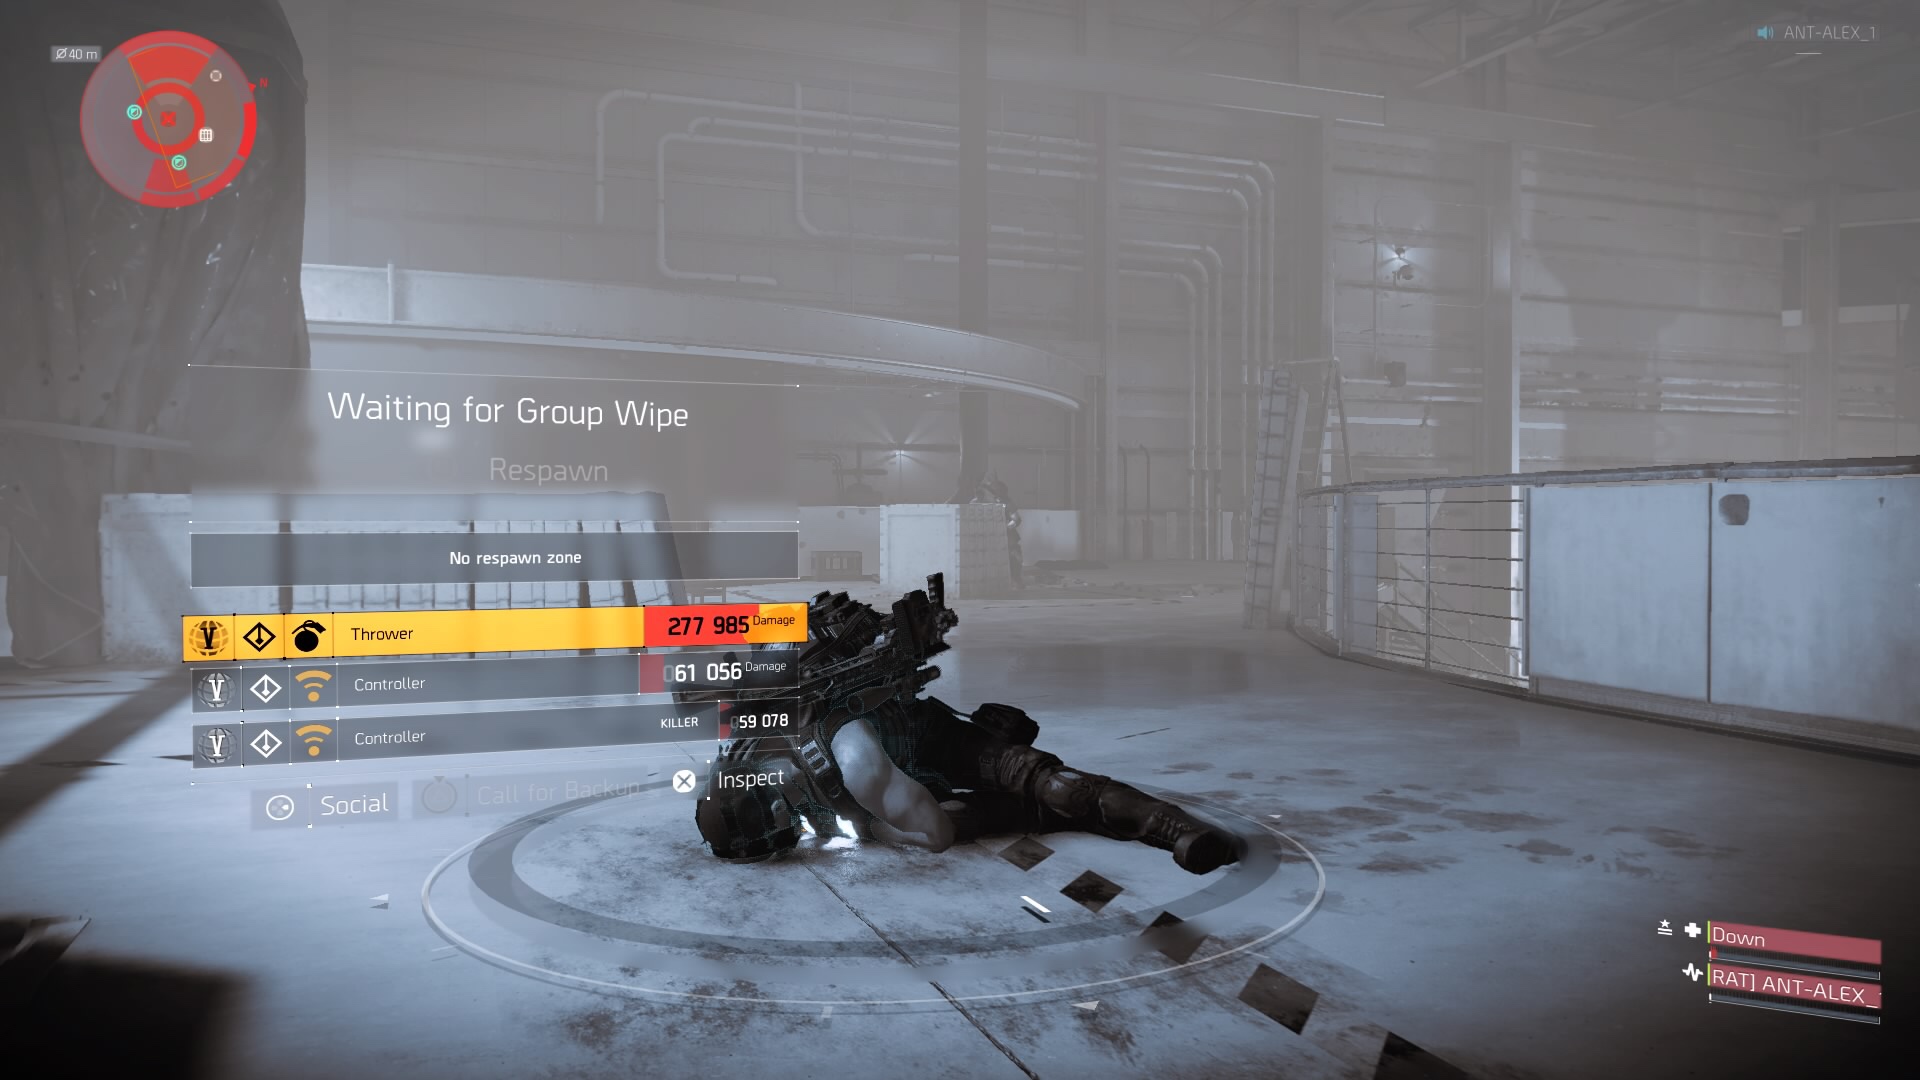 Screenshot of dead agent in silly position, on his face